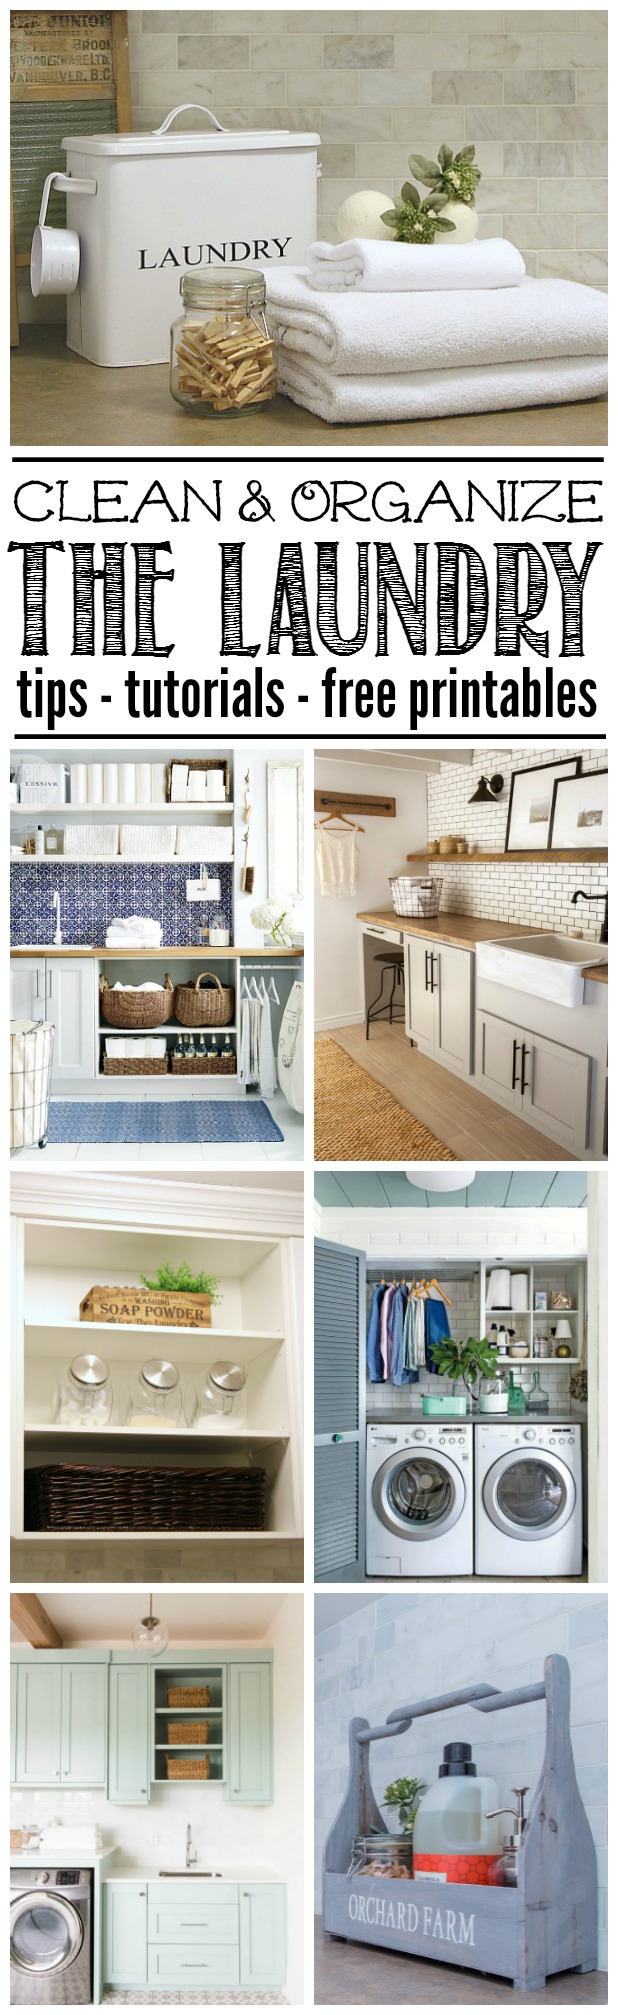 https://www.cleanandscentsible.com/wp-content/uploads/2016/06/How-to-Organize-the-Laundry-Room-Title.jpg